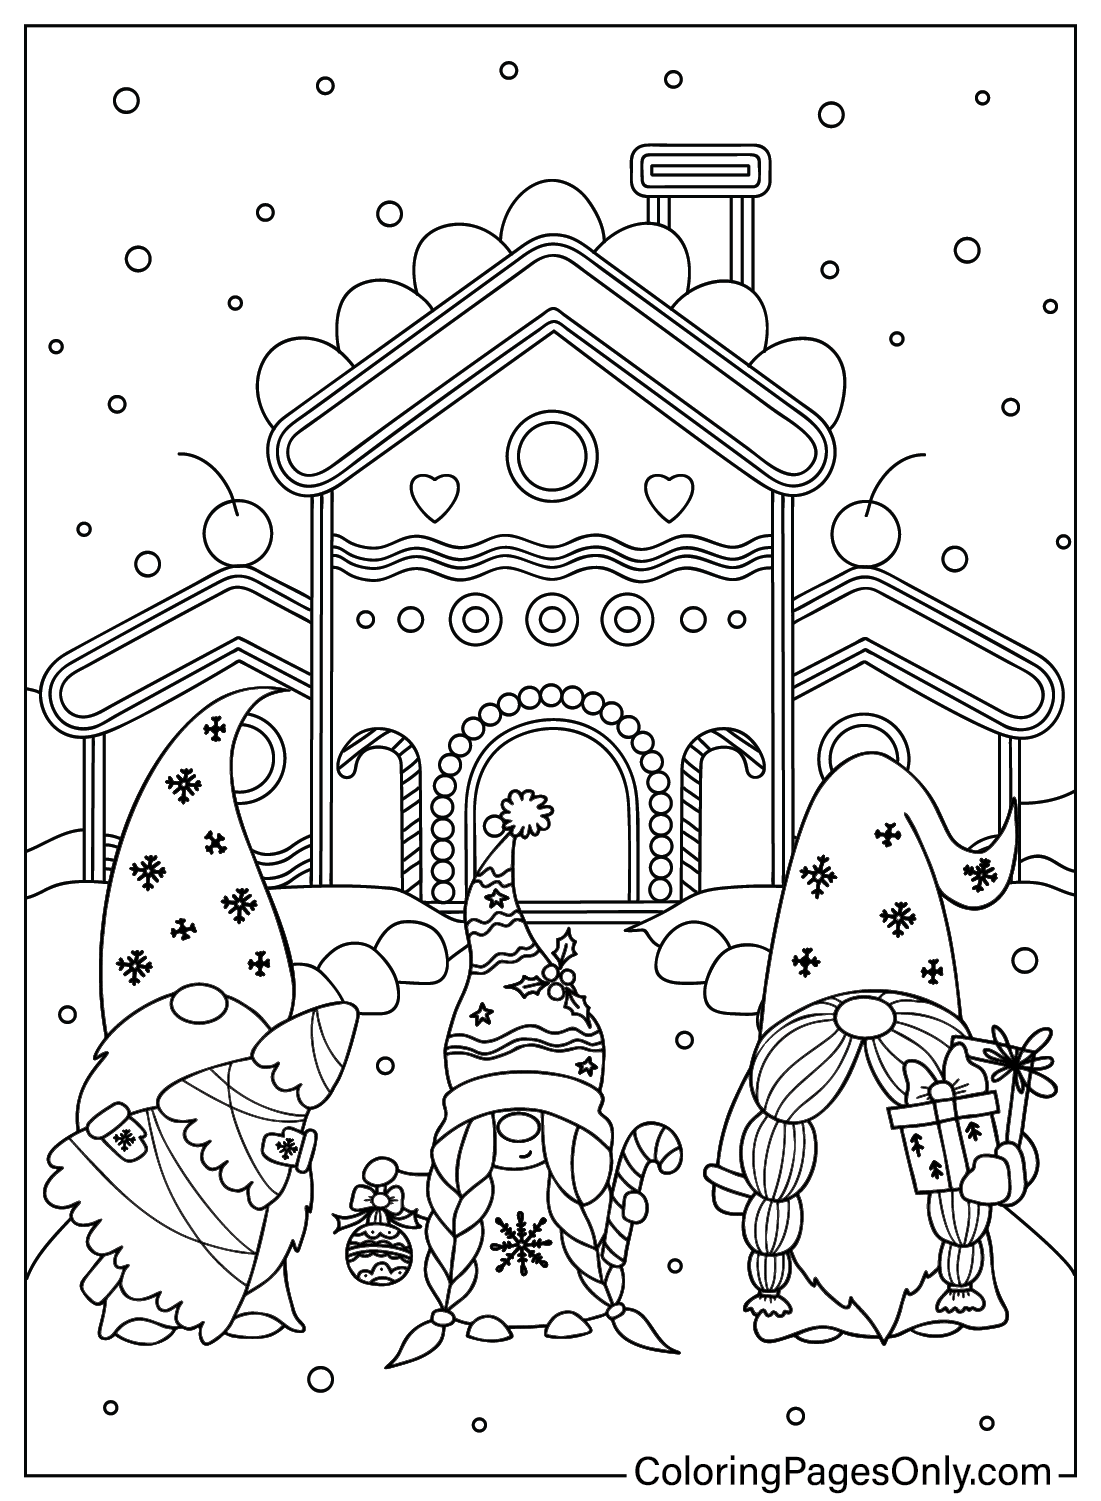 Gnome Christmas Coloring Page Free from Gnome